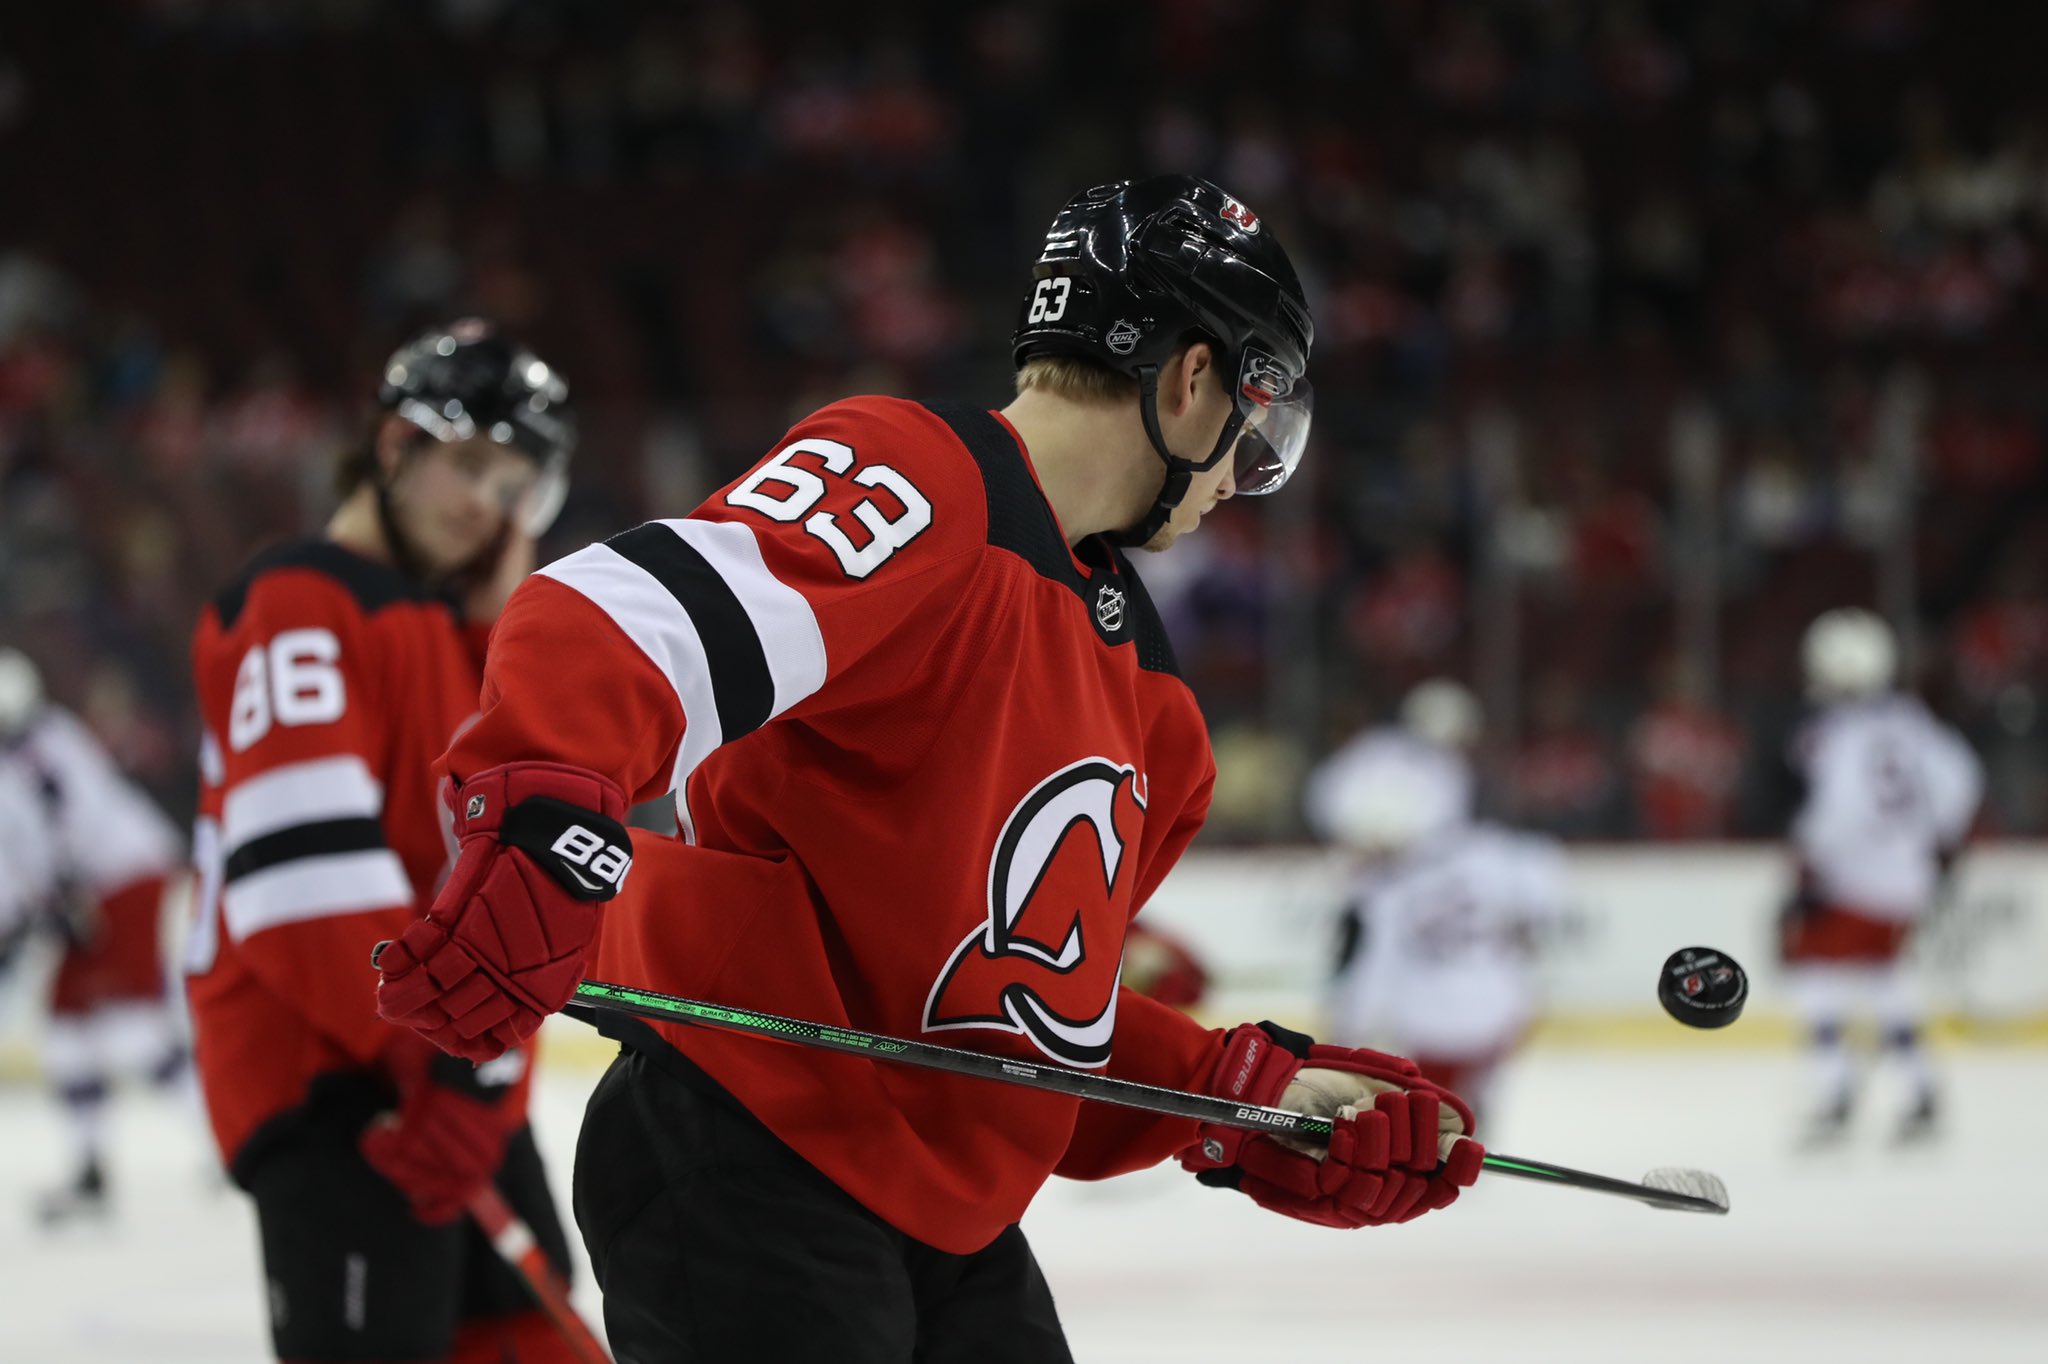 Sports News Roundup: Devils deal Coleman, Greene hours apart; Scott wins by two strokes at Riviera and more